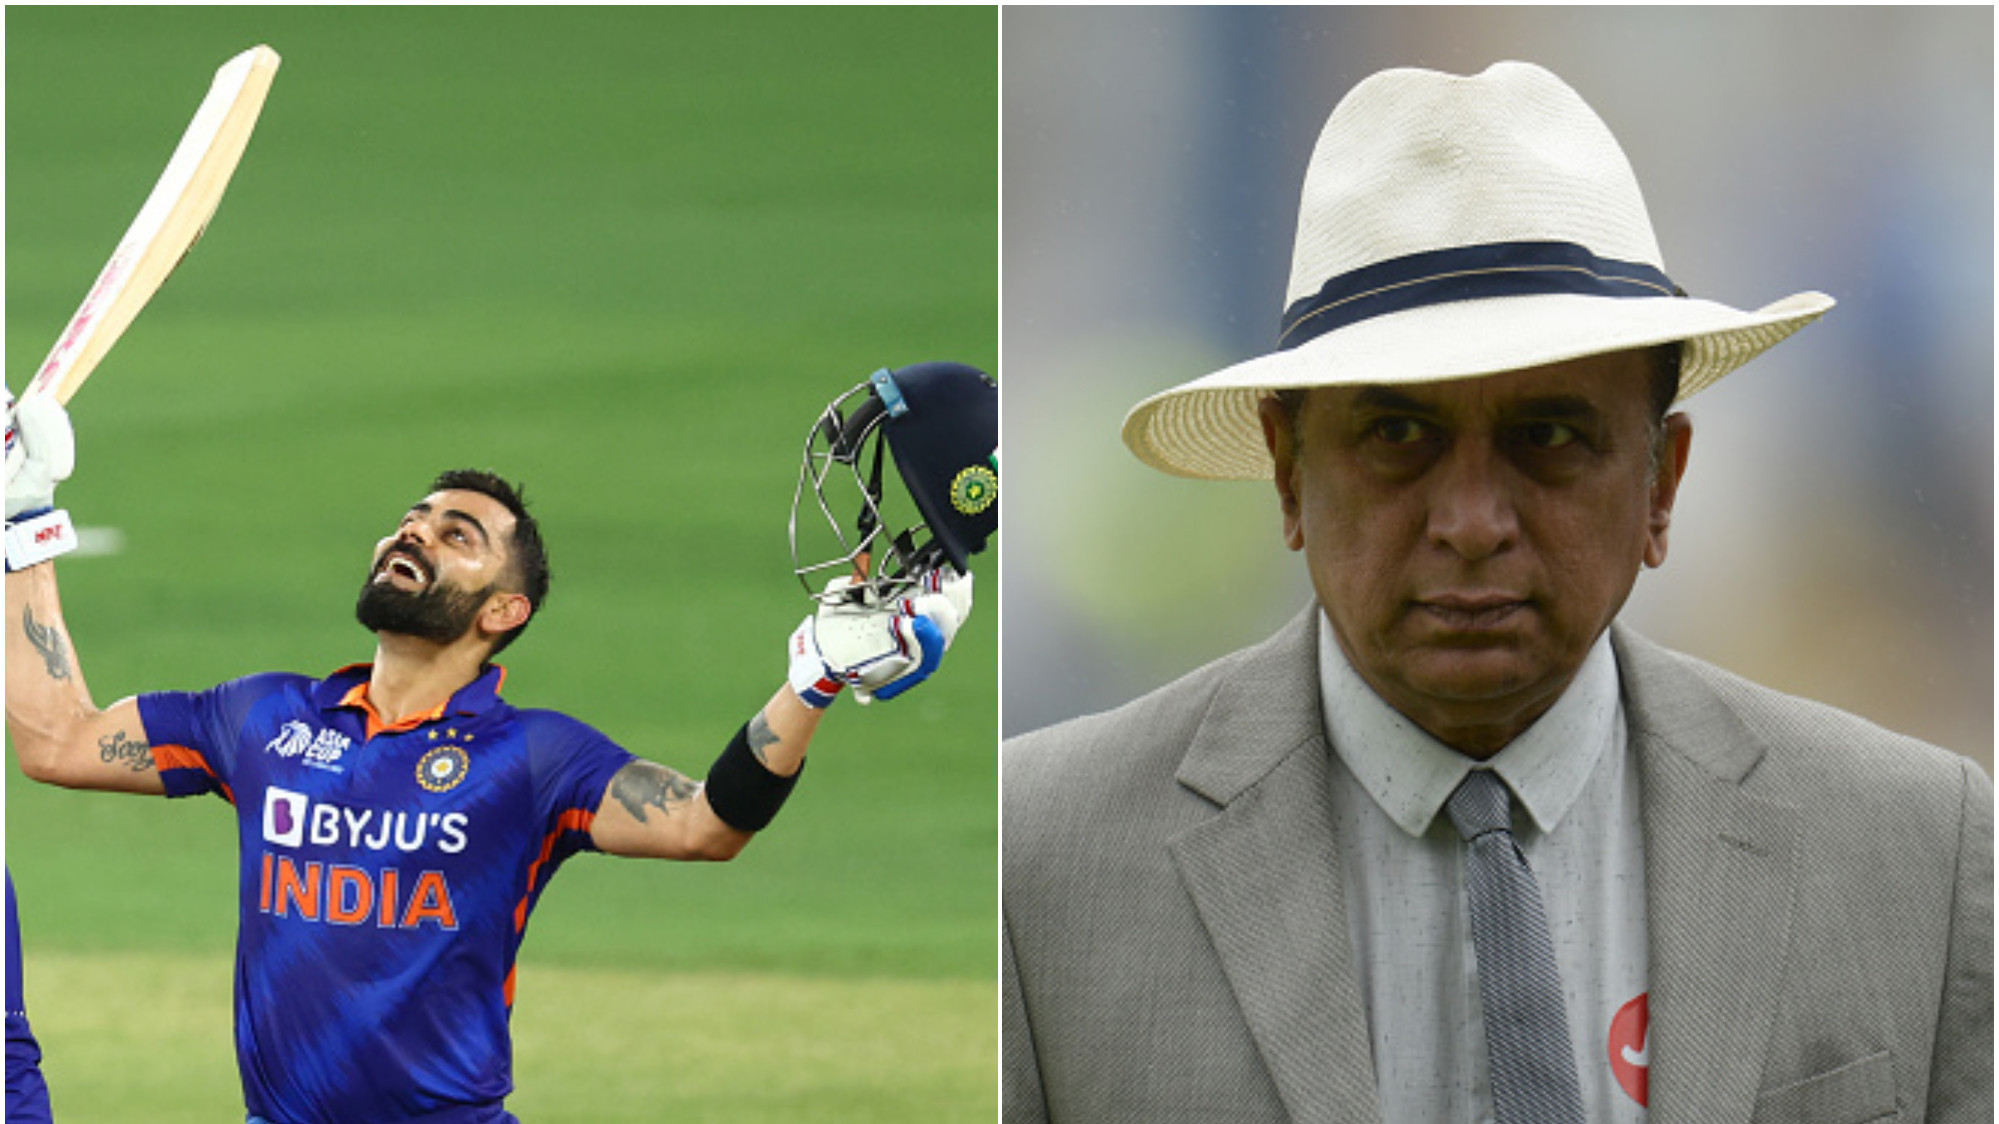 Asia Cup 2022: “Don’t be surprised if we see more hundreds from him” - Sunil Gavaskar after Virat Kohli’s 71st century